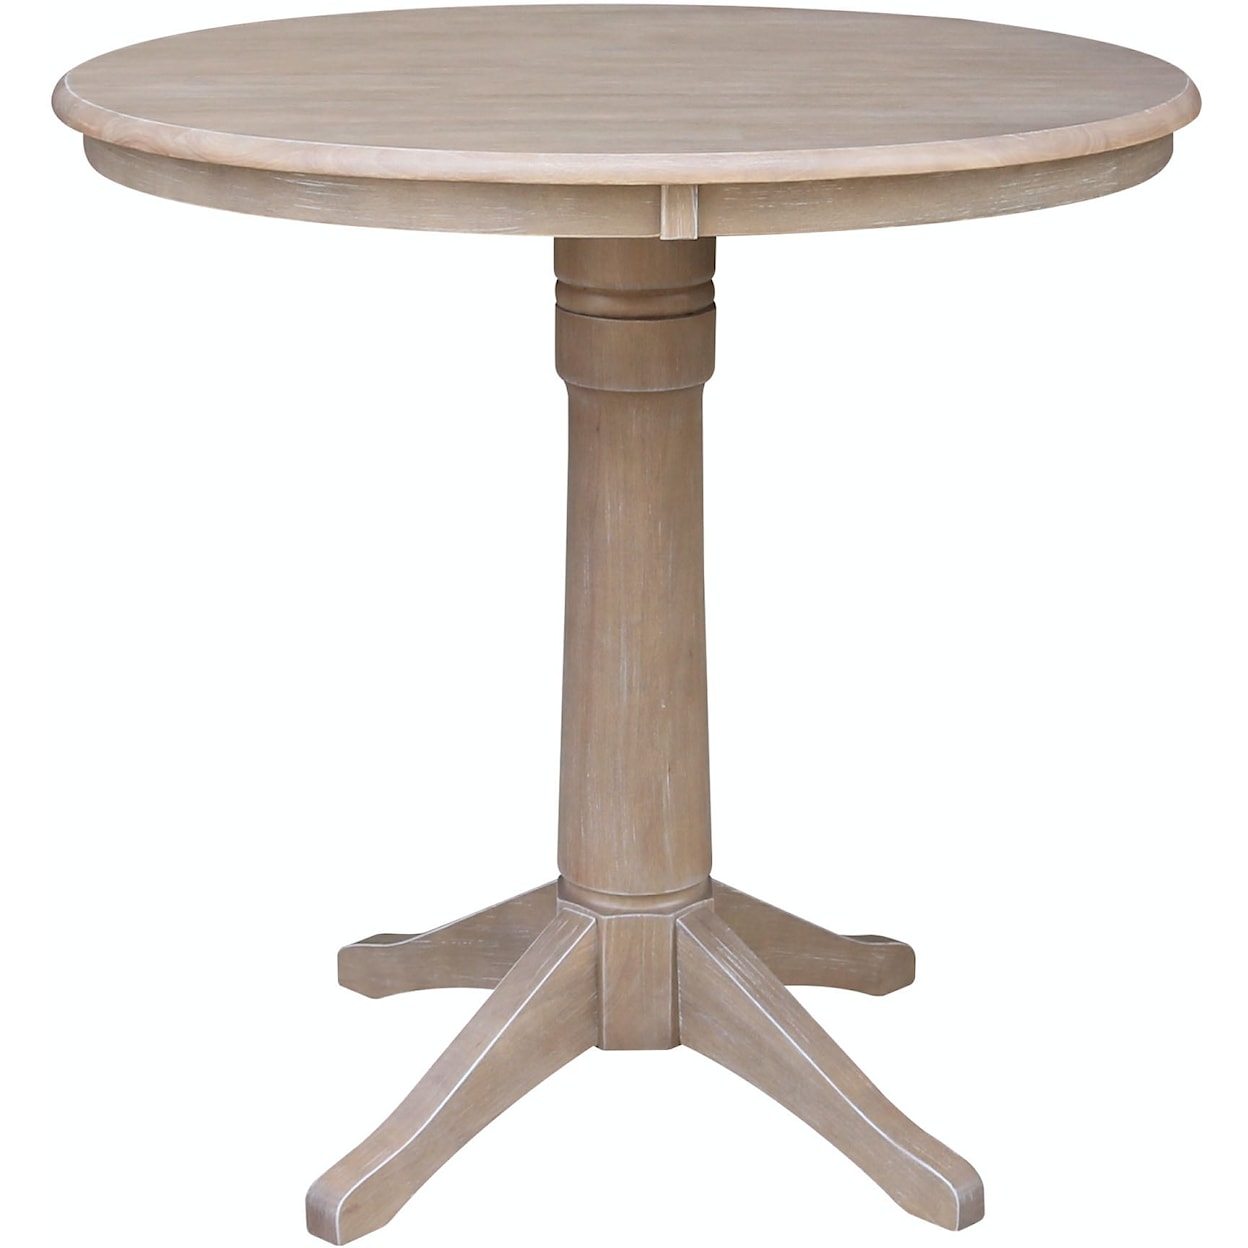 John Thomas Dining Essentials 36'' Pedestal Table in Taupe Gray